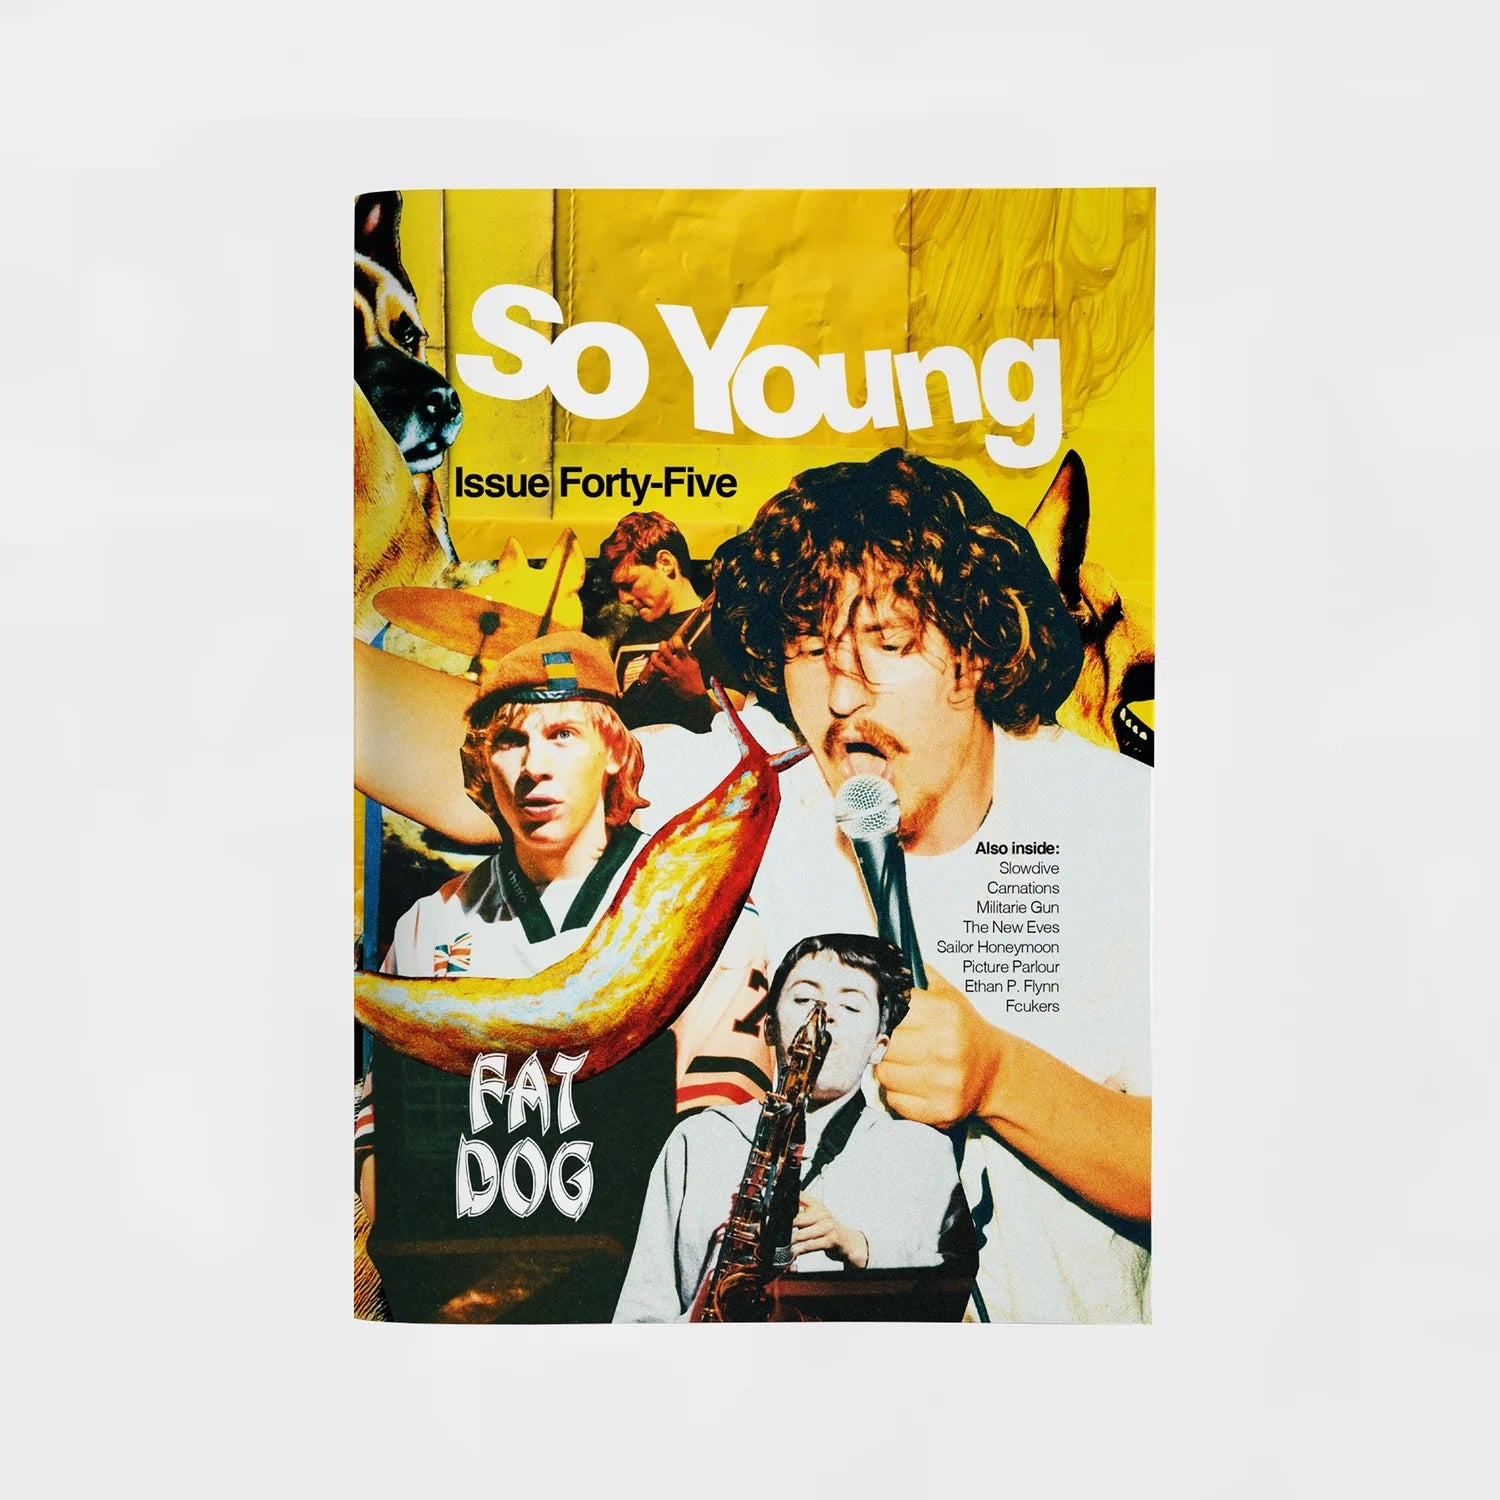 SO YOUNG MAGAZINE 'ISSUE FORTY-FIVE'